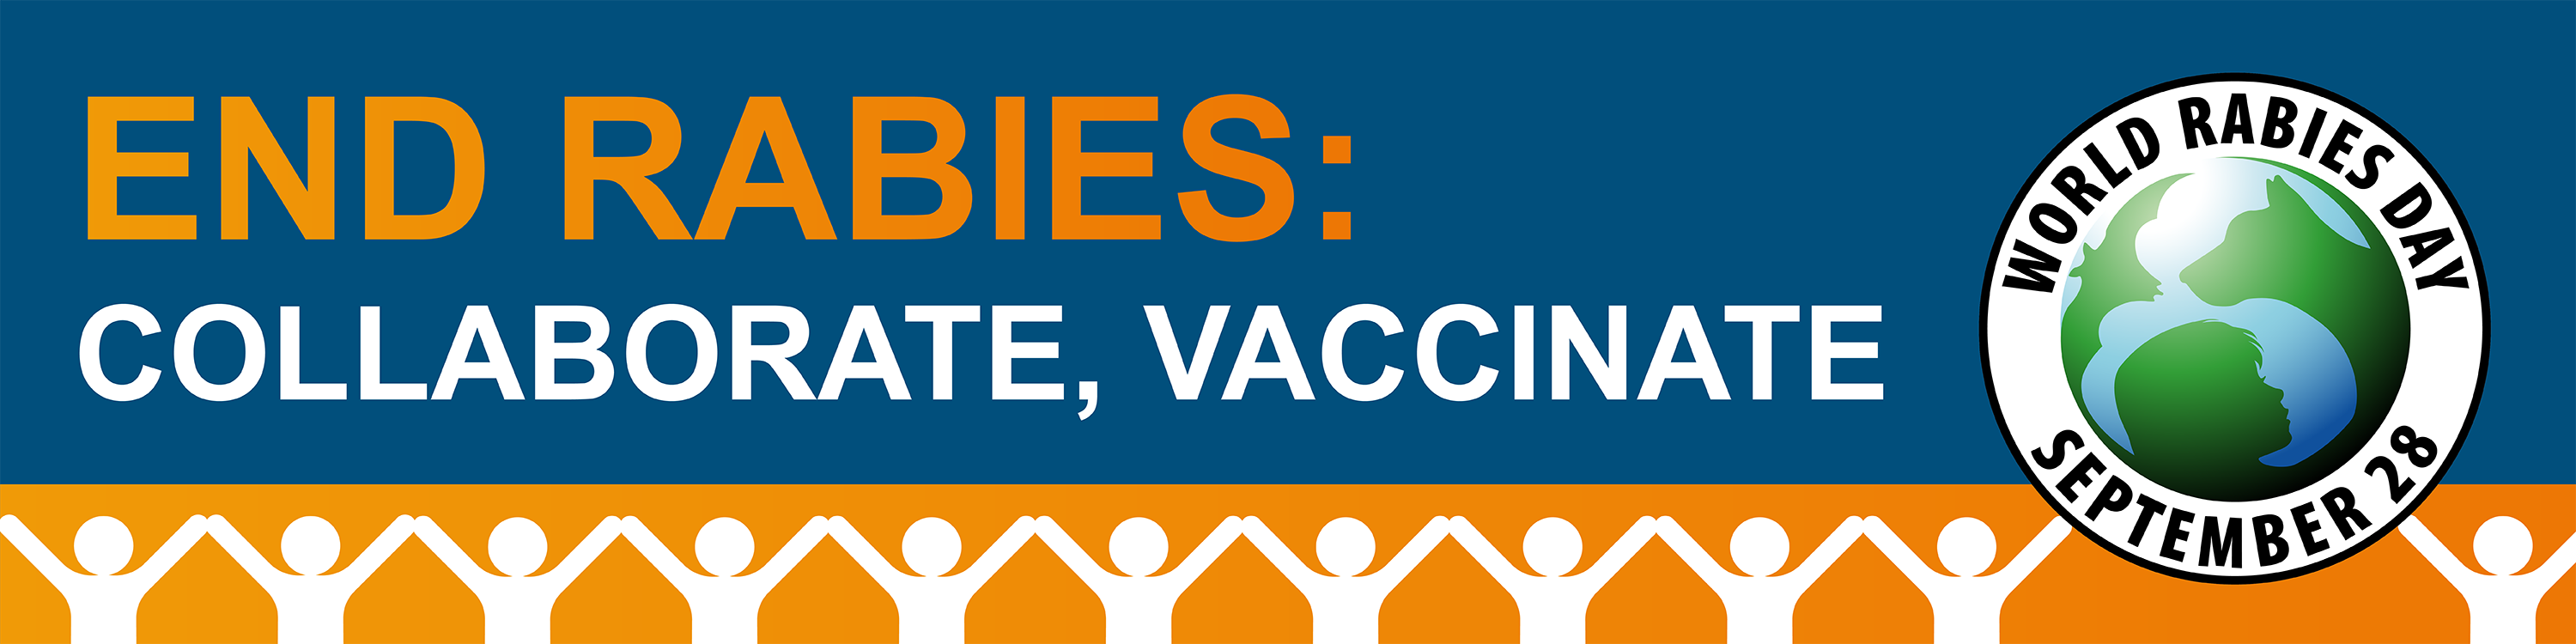 End Rabies: Collaborate, Vaccinate World Rabies Day 2020 themed banner